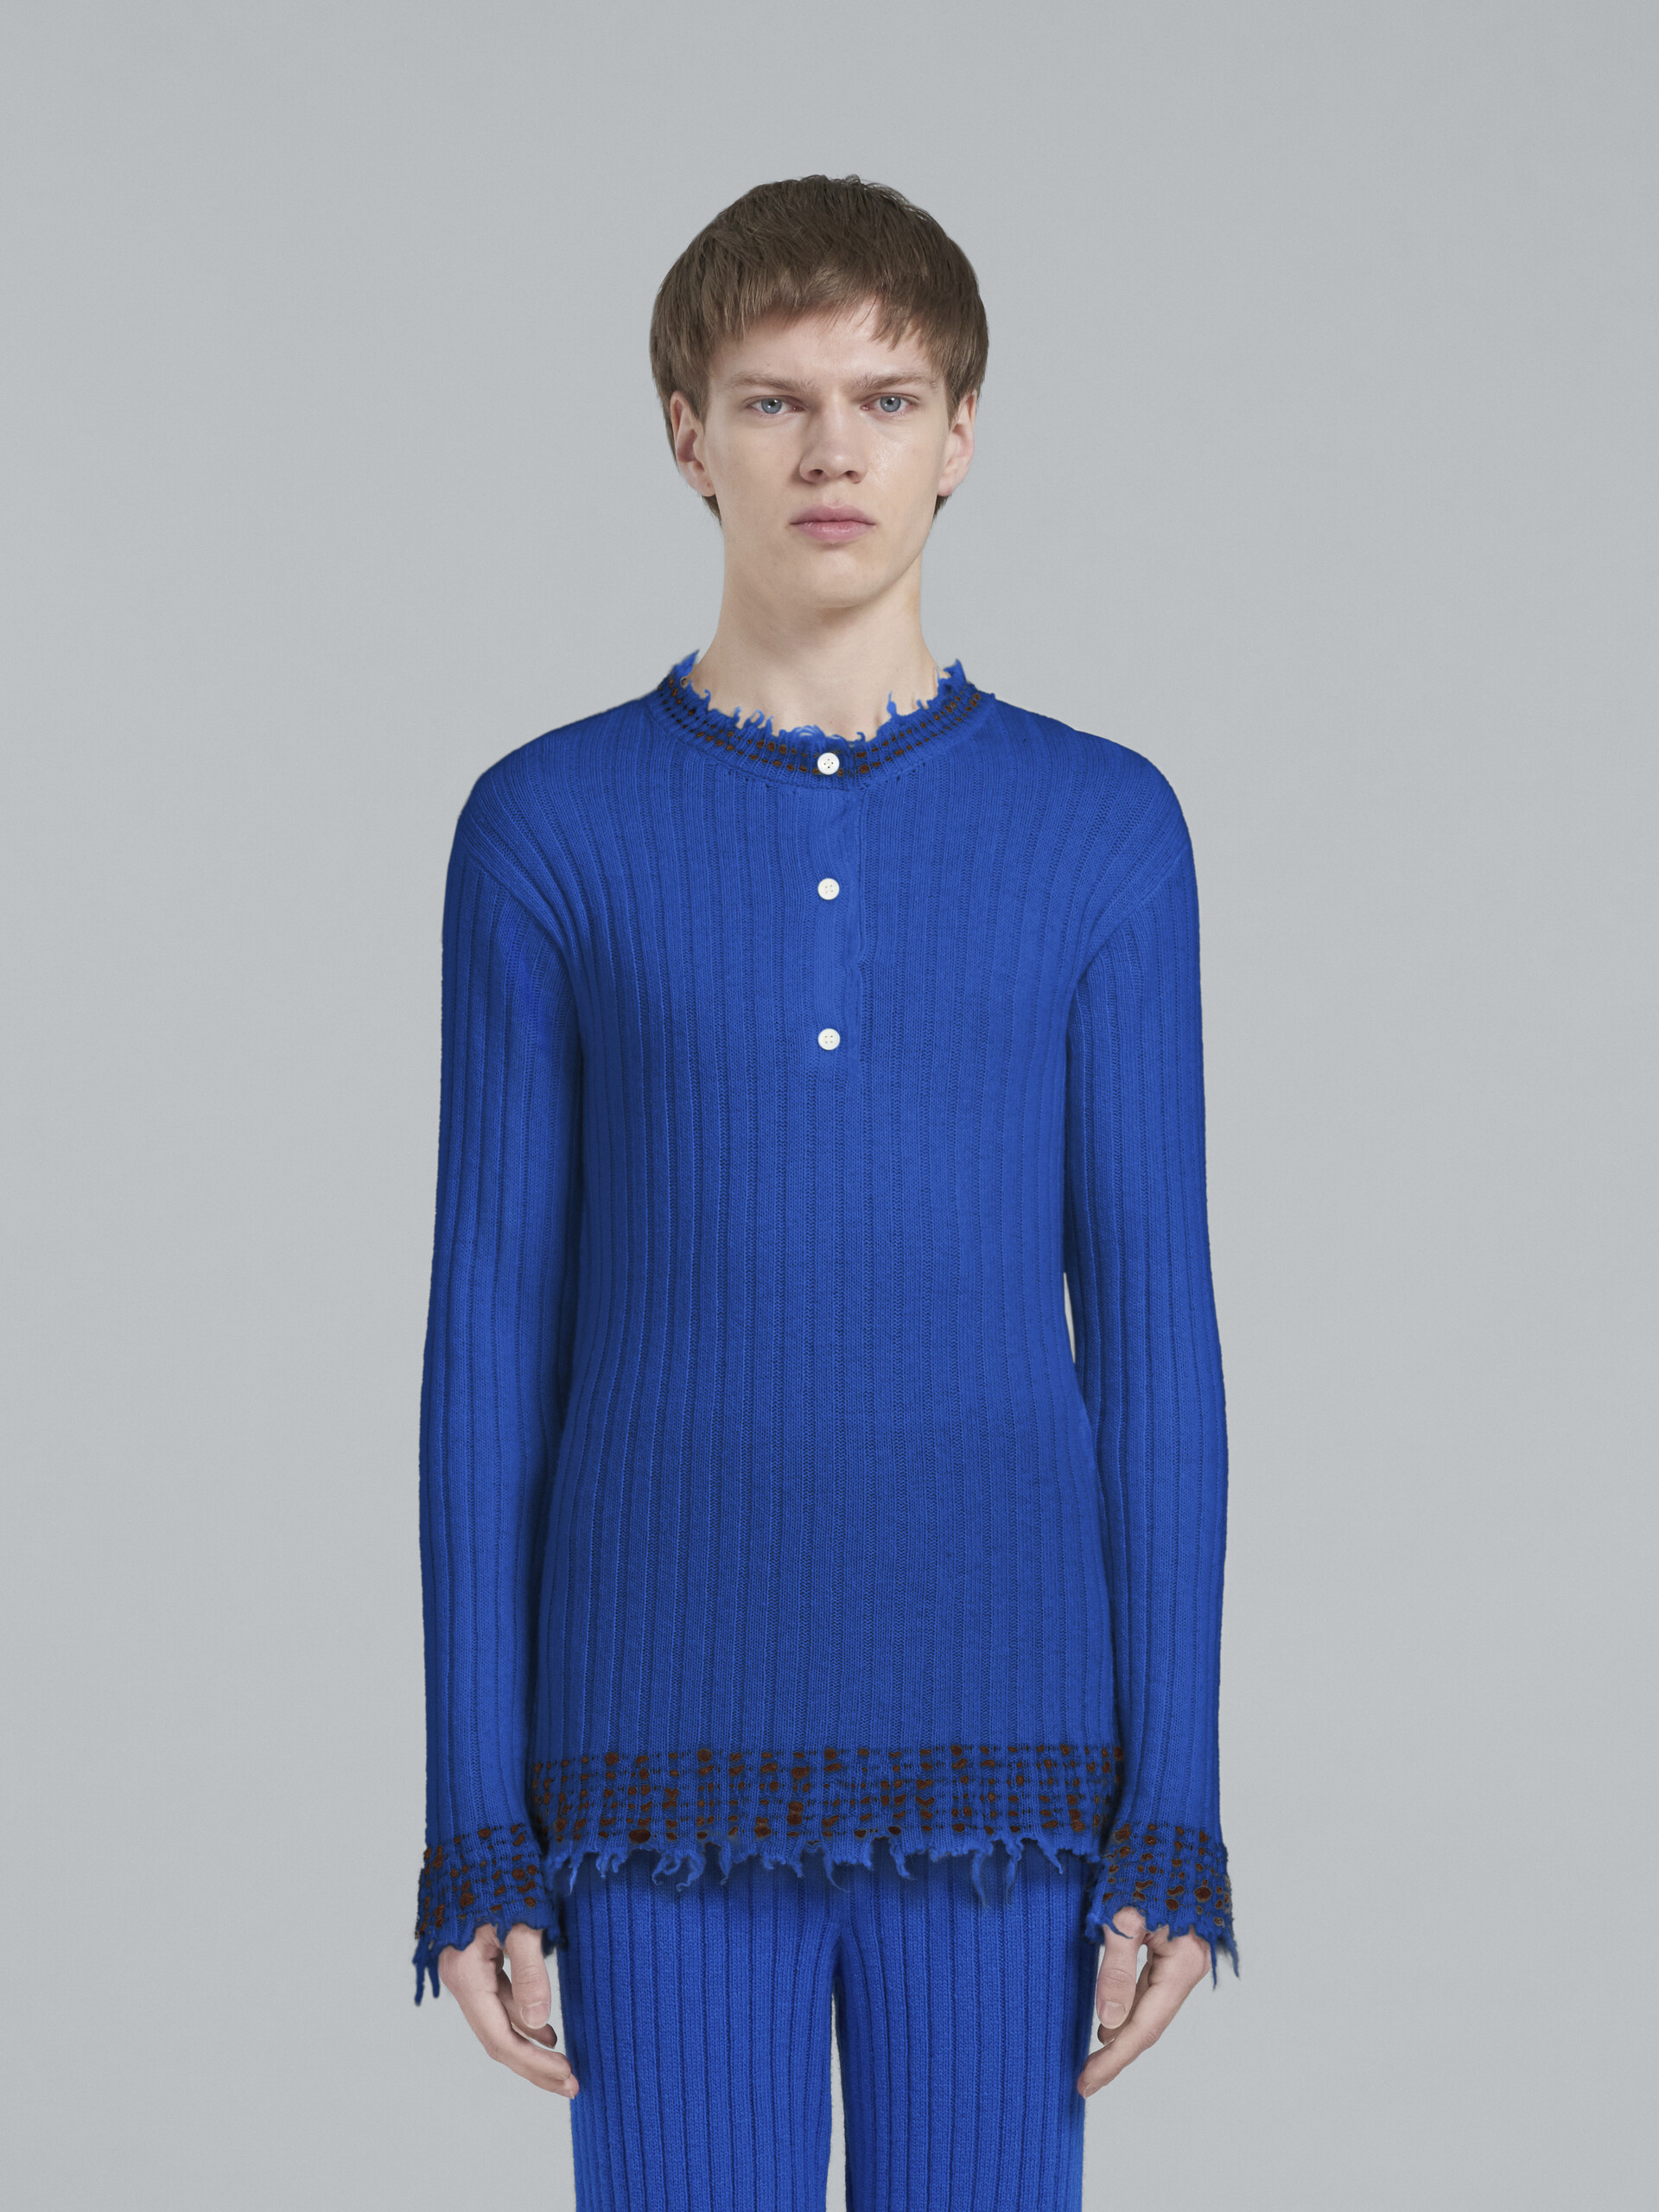 Blue knitted wool sweater - Pullovers - Image 2